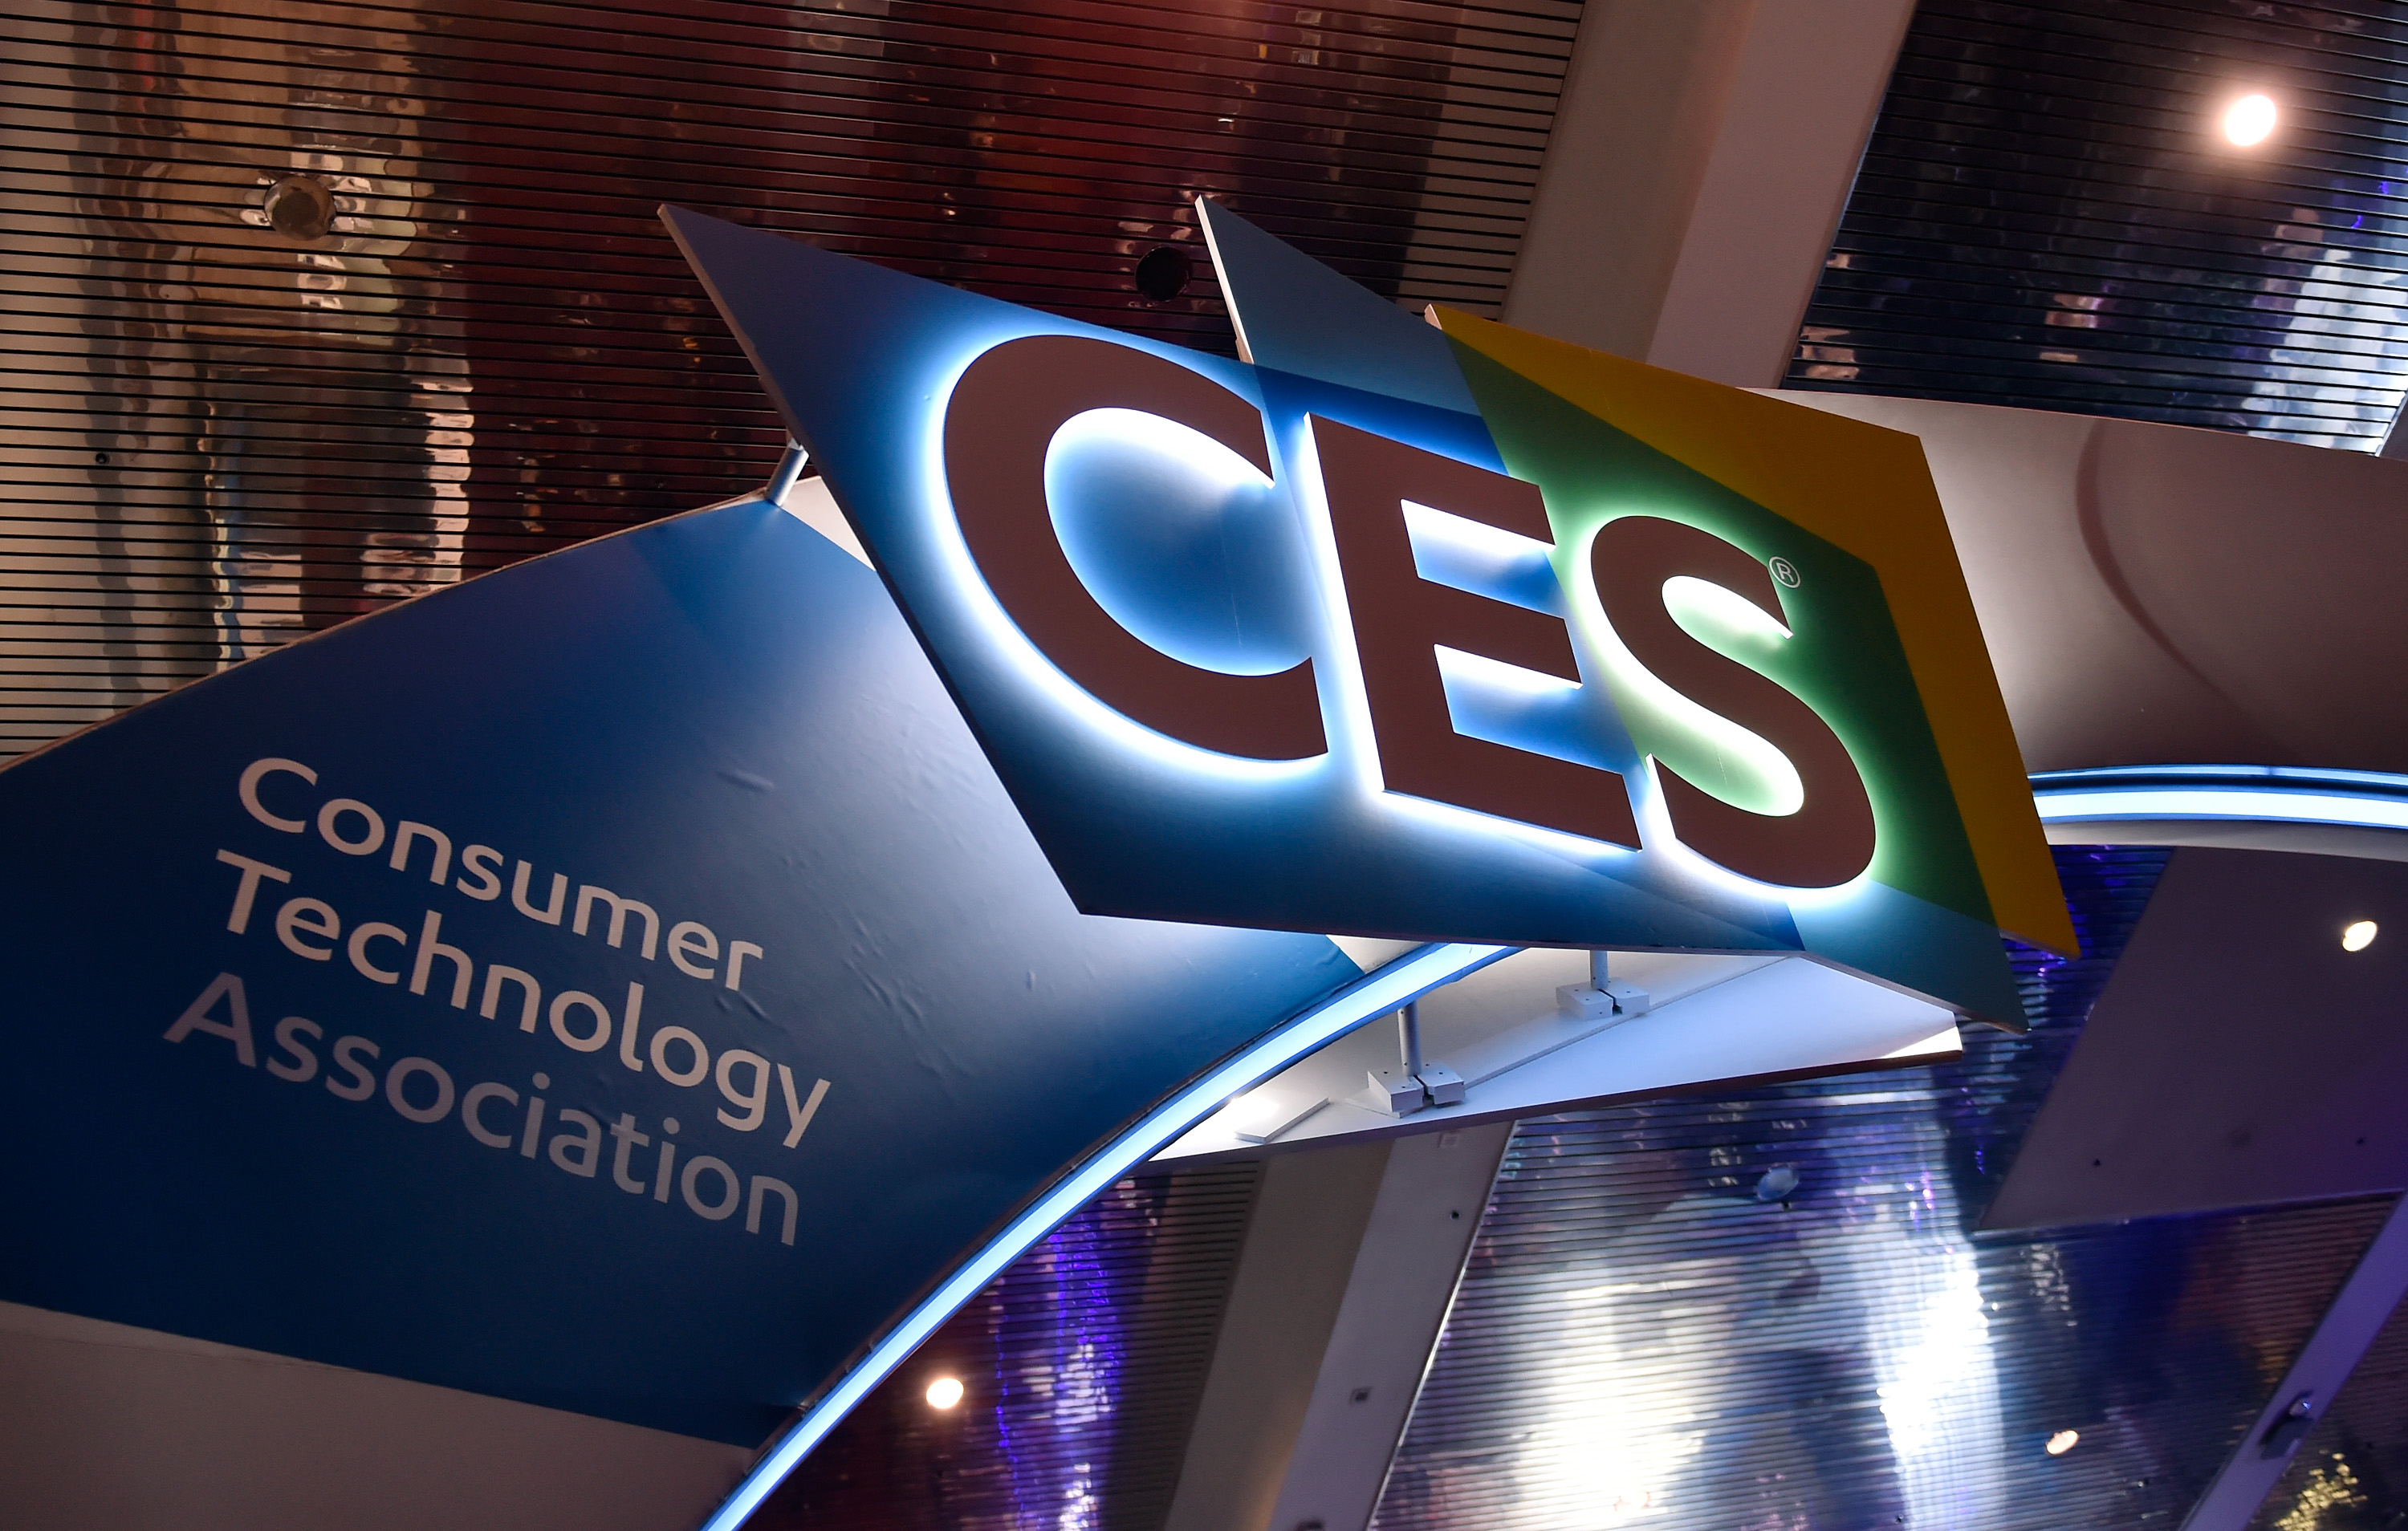 LAS VEGAS, NV - JANUARY 09:  The CES logo is seen during CES 2018 at the Las Vegas Convention Center on January 9, 2018 in Las Vegas, Nevada. CES, the world's largest annual consumer technology trade show, runs through January 12 and features about 3,900 exhibitors showing off their latest products and services to more than 170,000 attendees.  (Photo by David Becker/Getty Images) (David Becker&mdash;Getty Images)